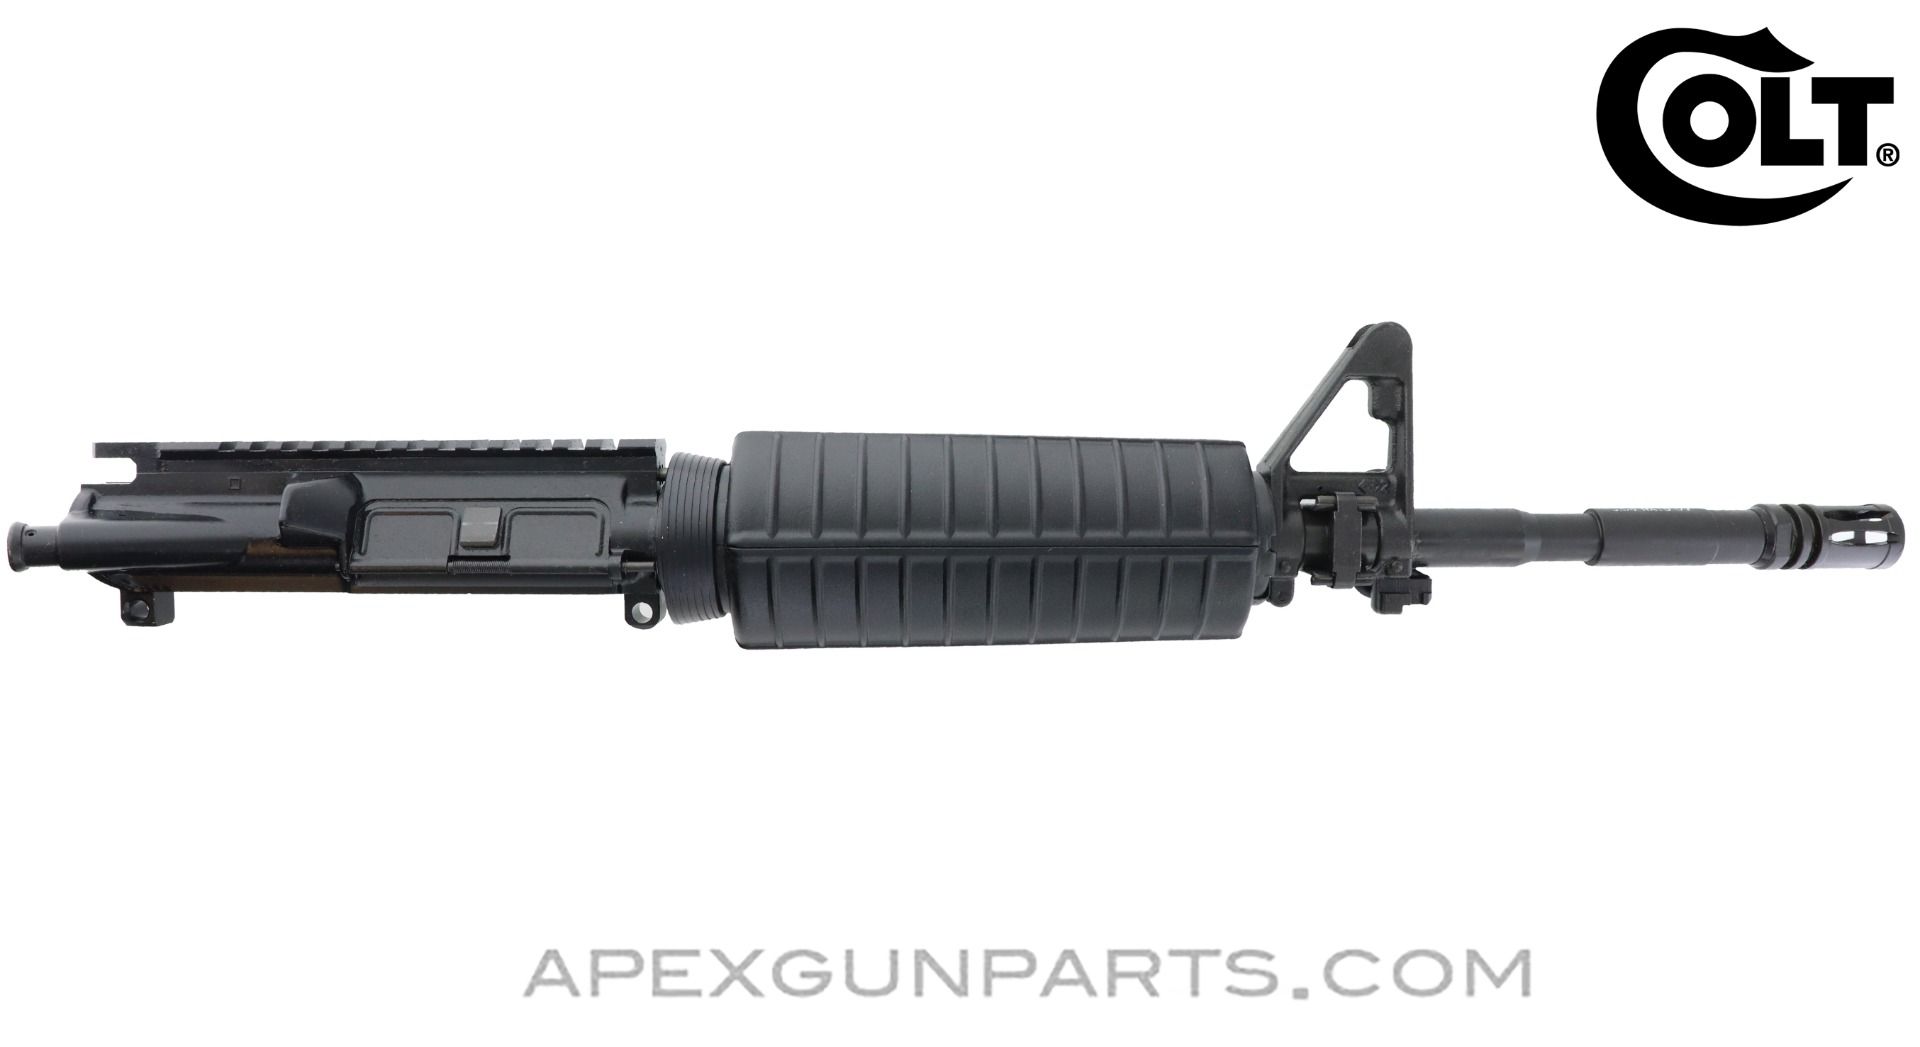 Colt M4A1 Socom R0977HB Special Configuration Upper, 14.5 long, 1 in 7  twist chrome lined HBAR, With Side Sling Swivel at Front Sight,  <strong>5.56X45 NATO